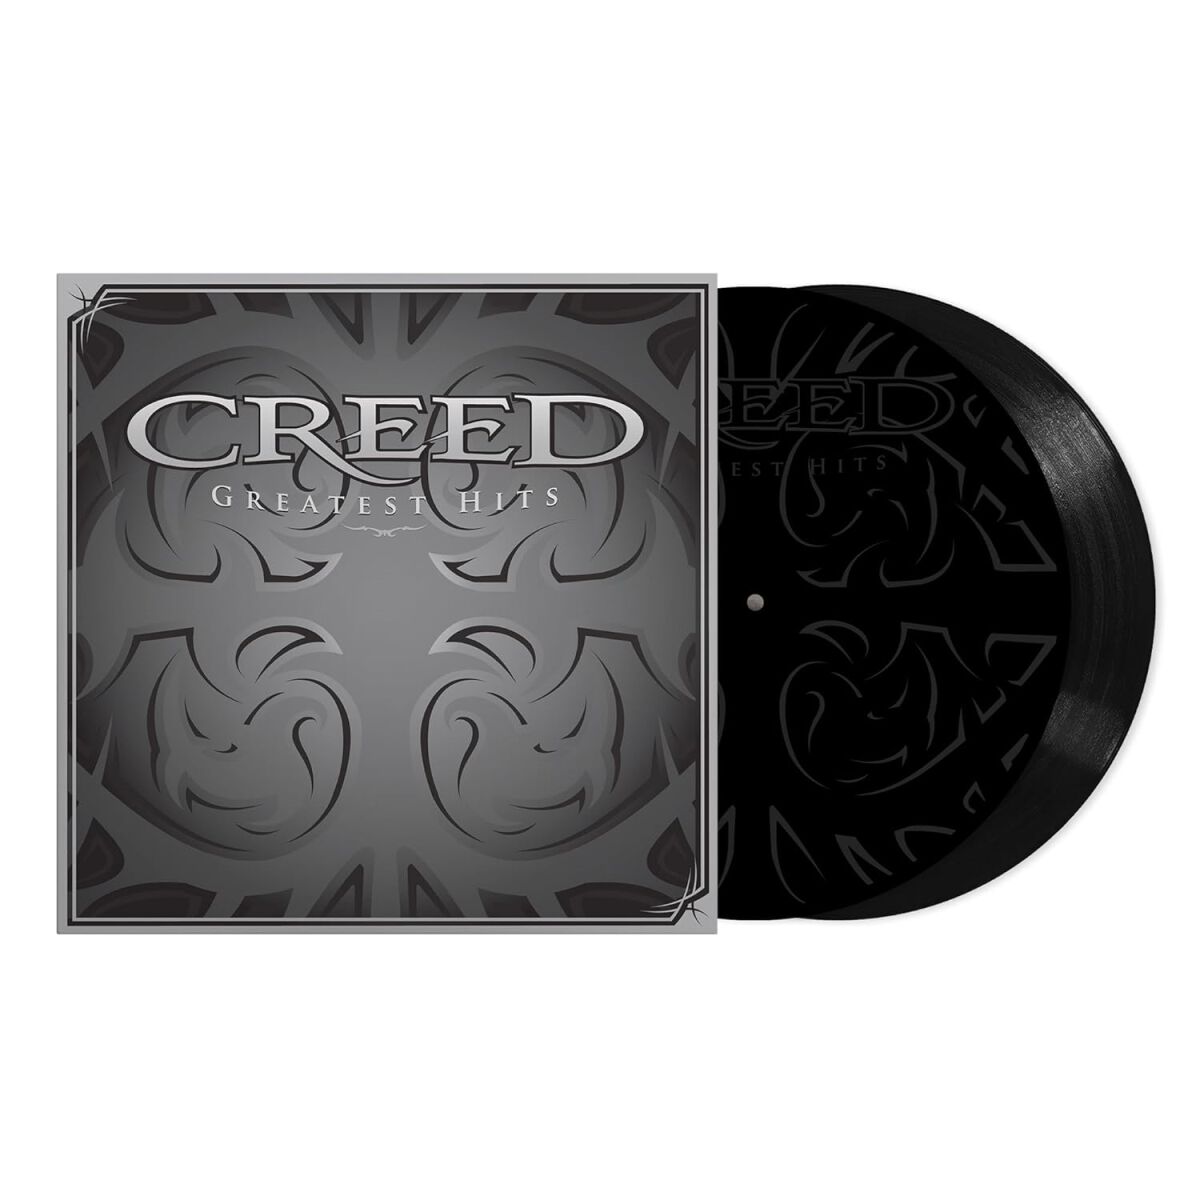 Image of LP di Creed - Greatest hits - Unisex - standard